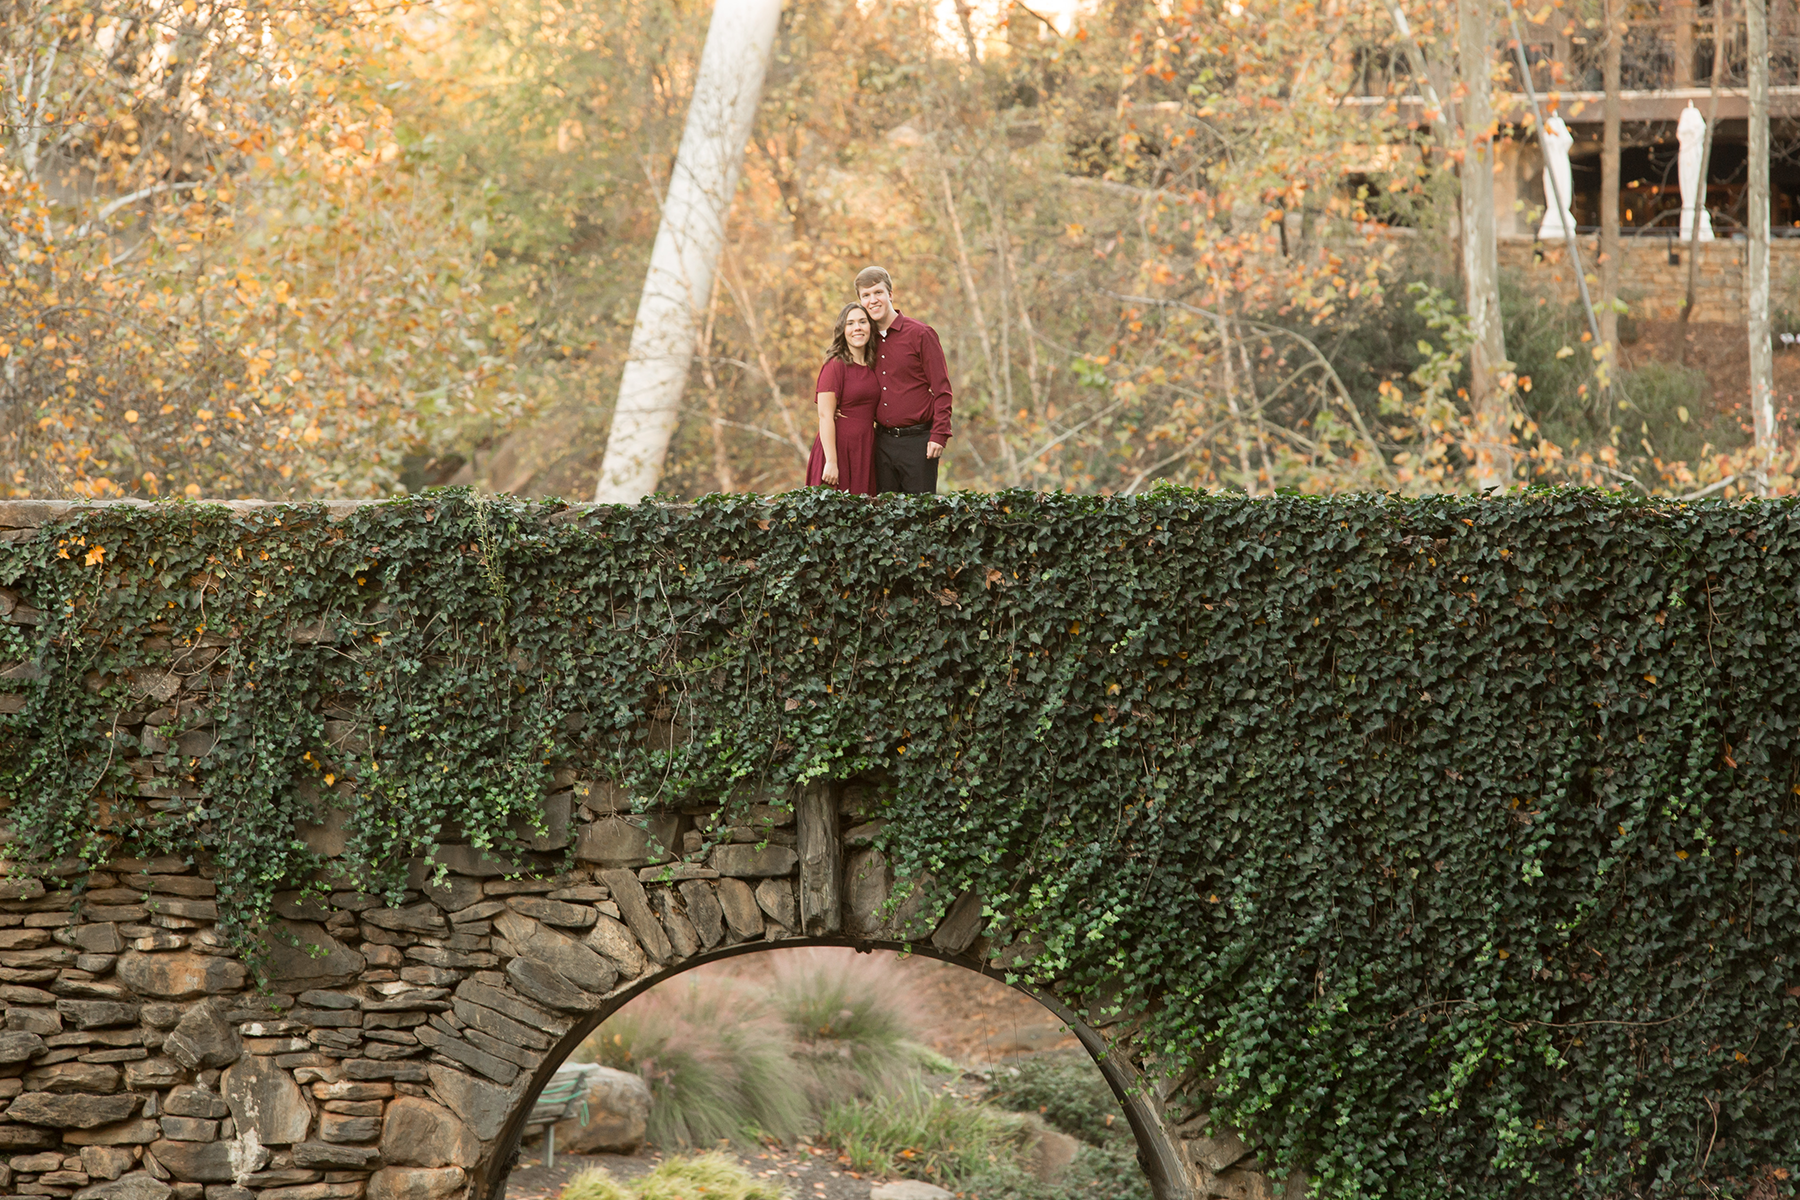 Engagement photos in Greenville, South Carolina